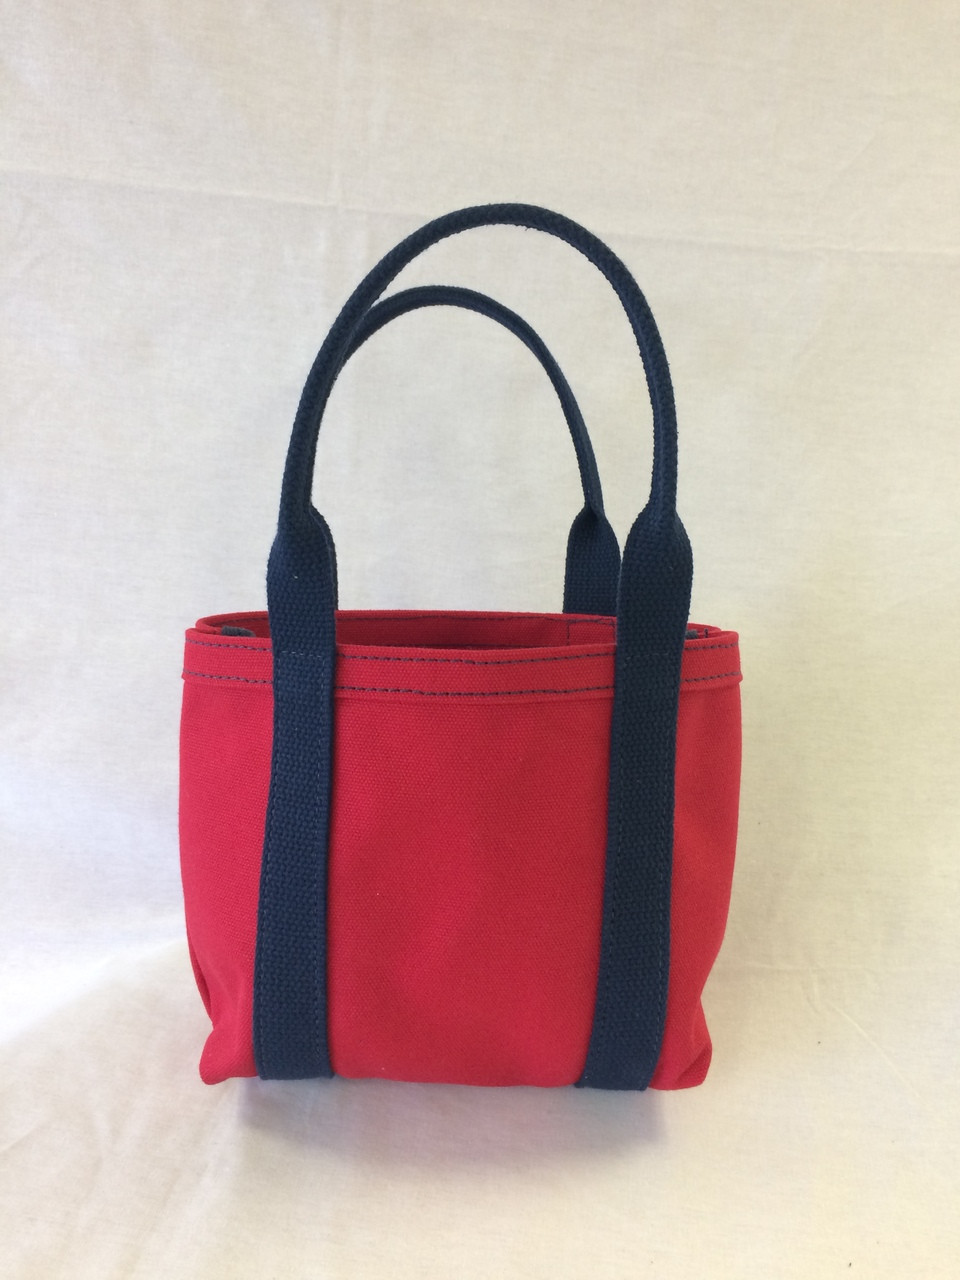 SONOMA SMALL SHOE TOTE – The Navy Knot